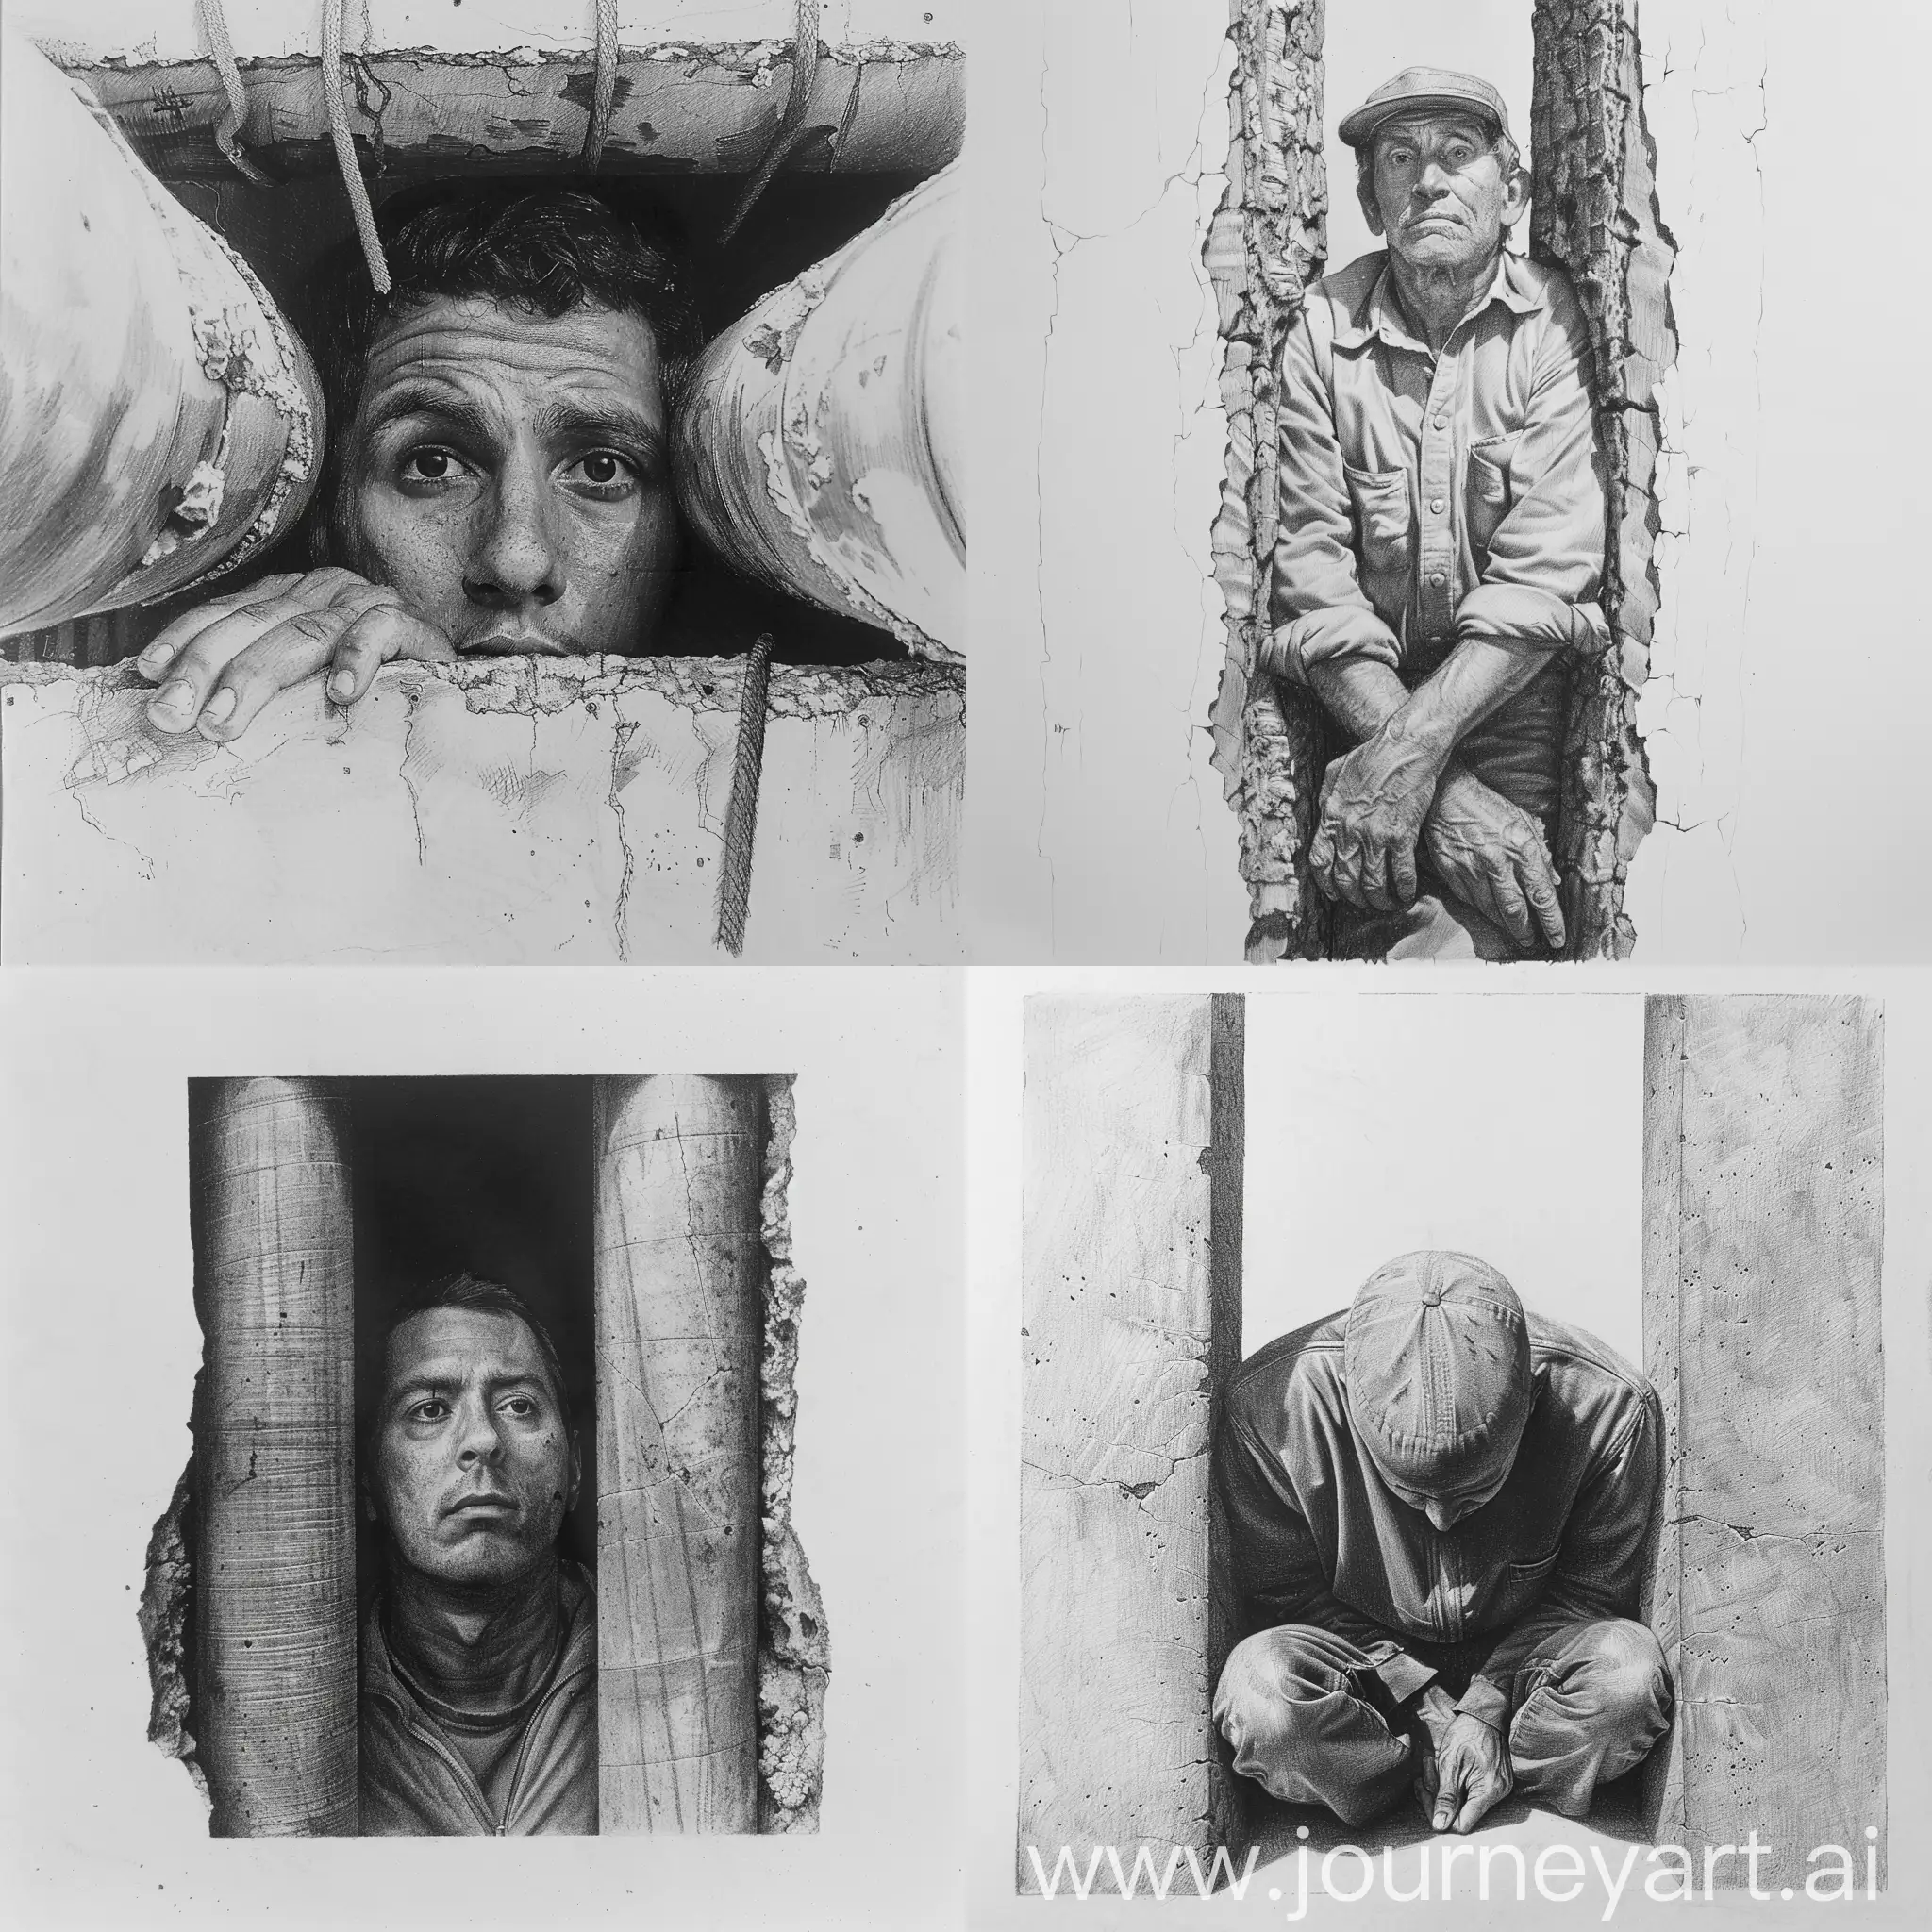 Pencil drawing of a man sandwiched between two shafts.